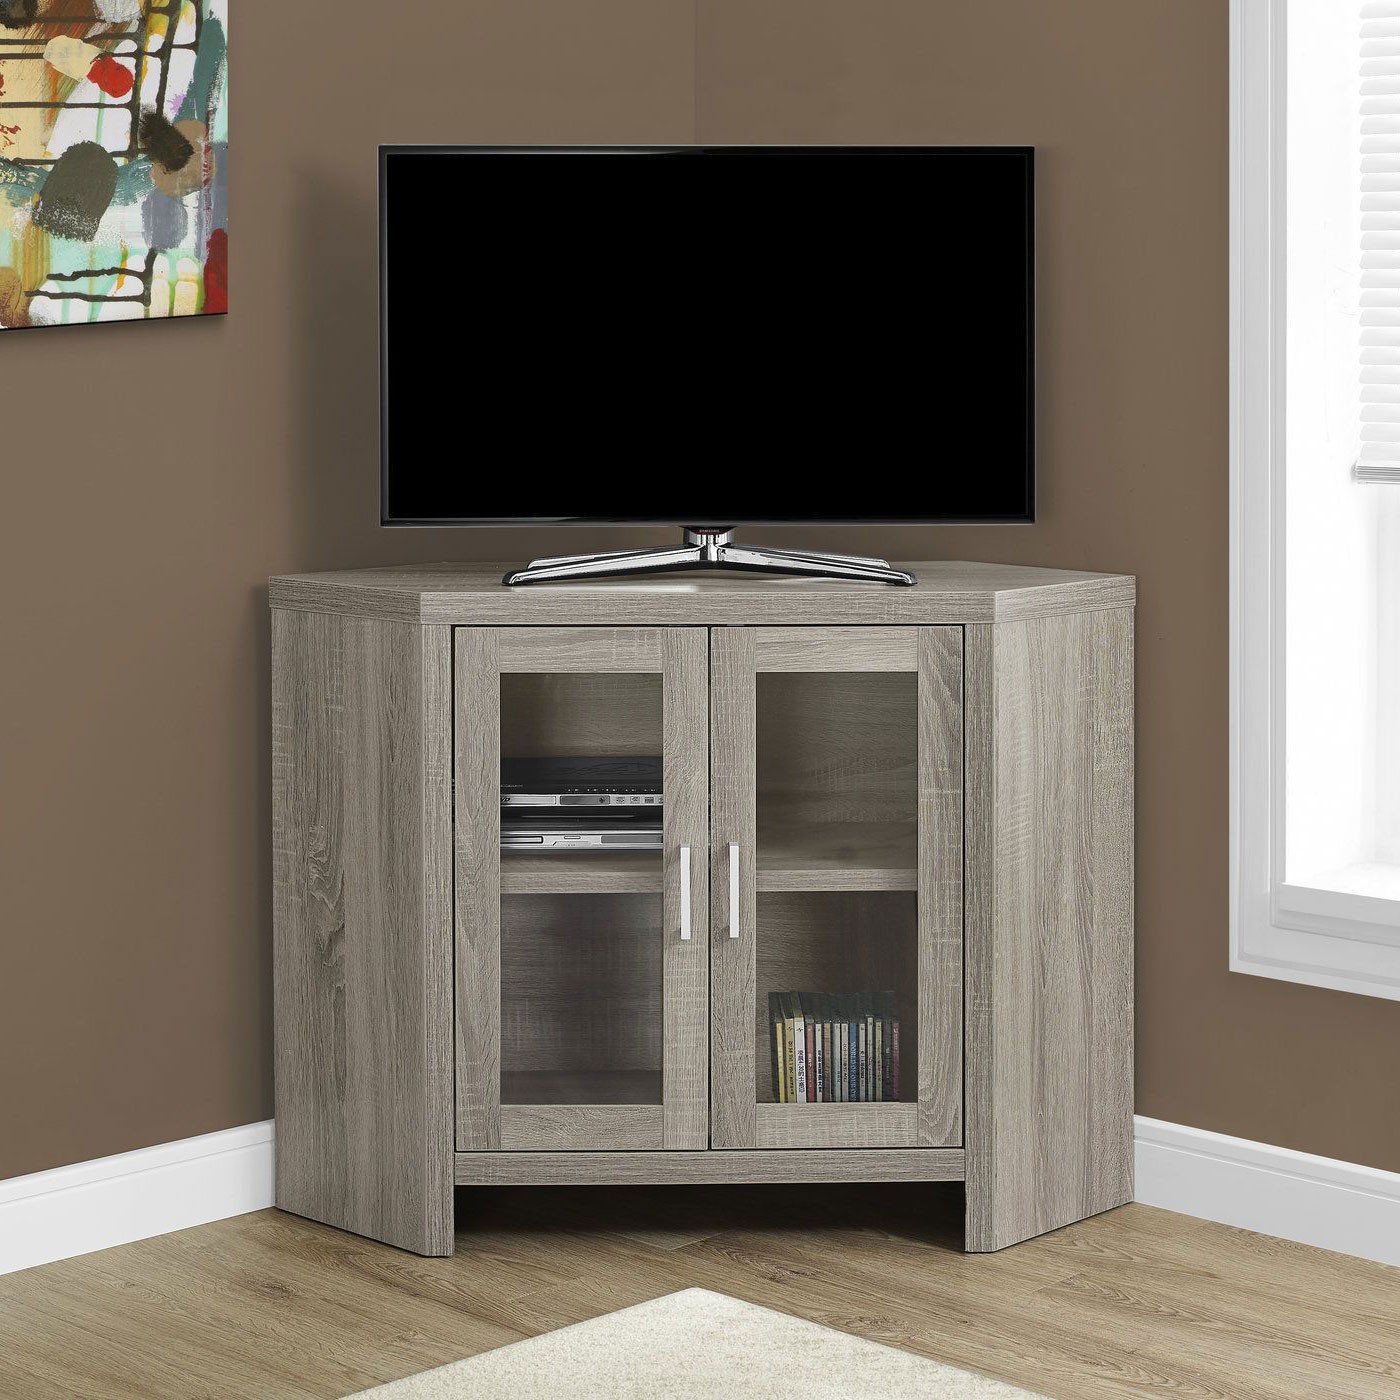 Monarch specialties modern corner television stand with